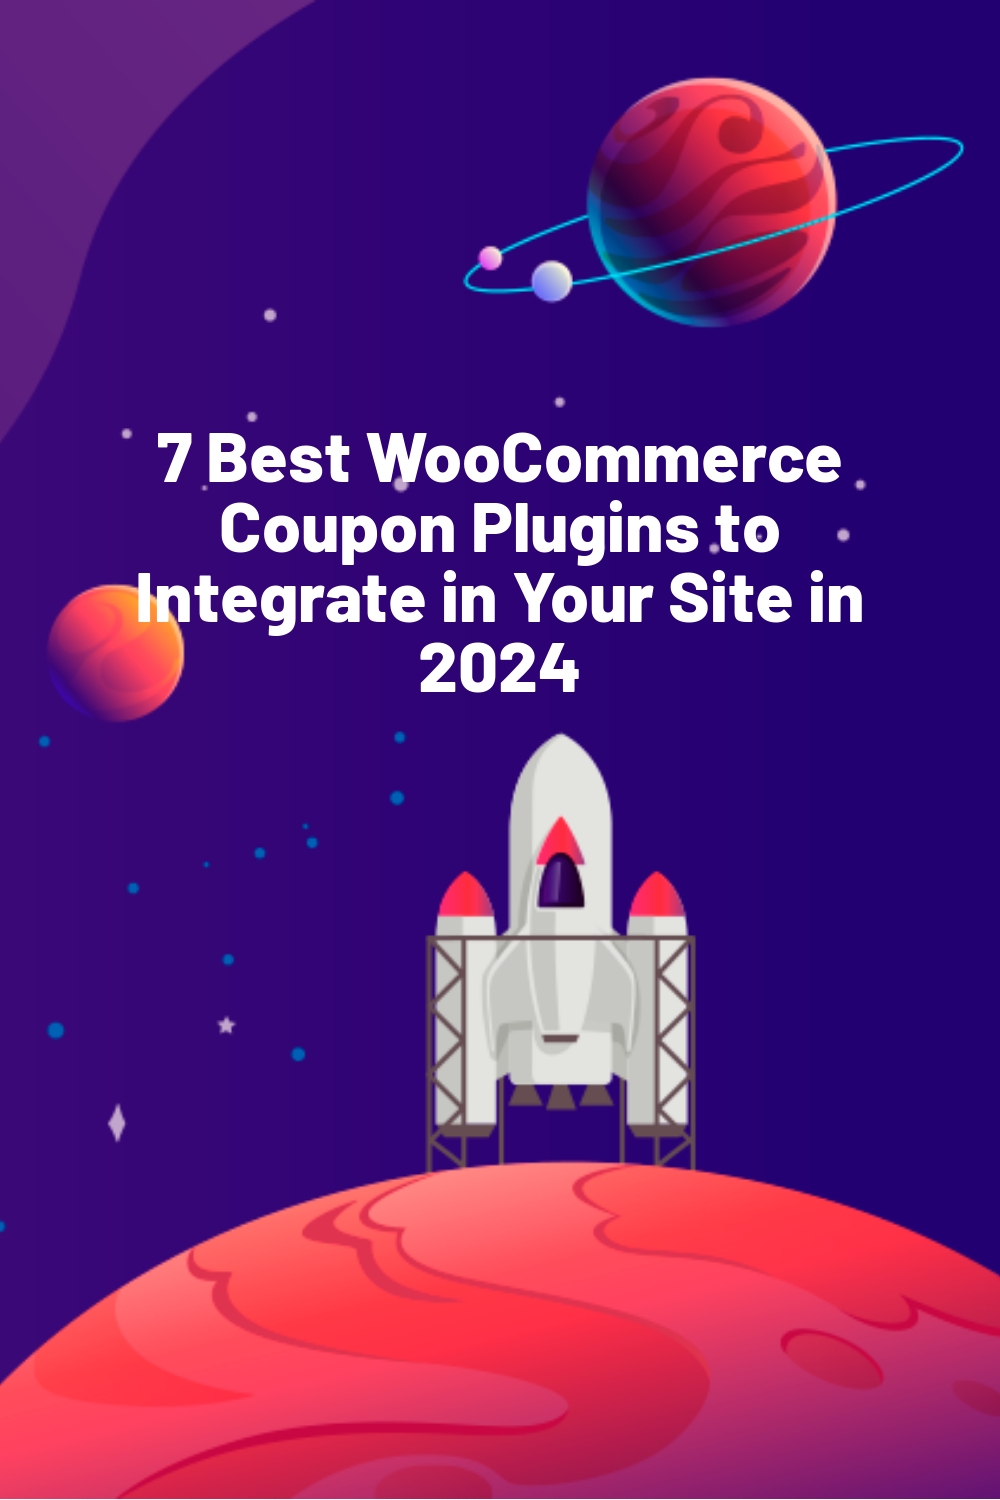 7 Best WooCommerce Coupon Plugins to Integrate in Your Site in 2024